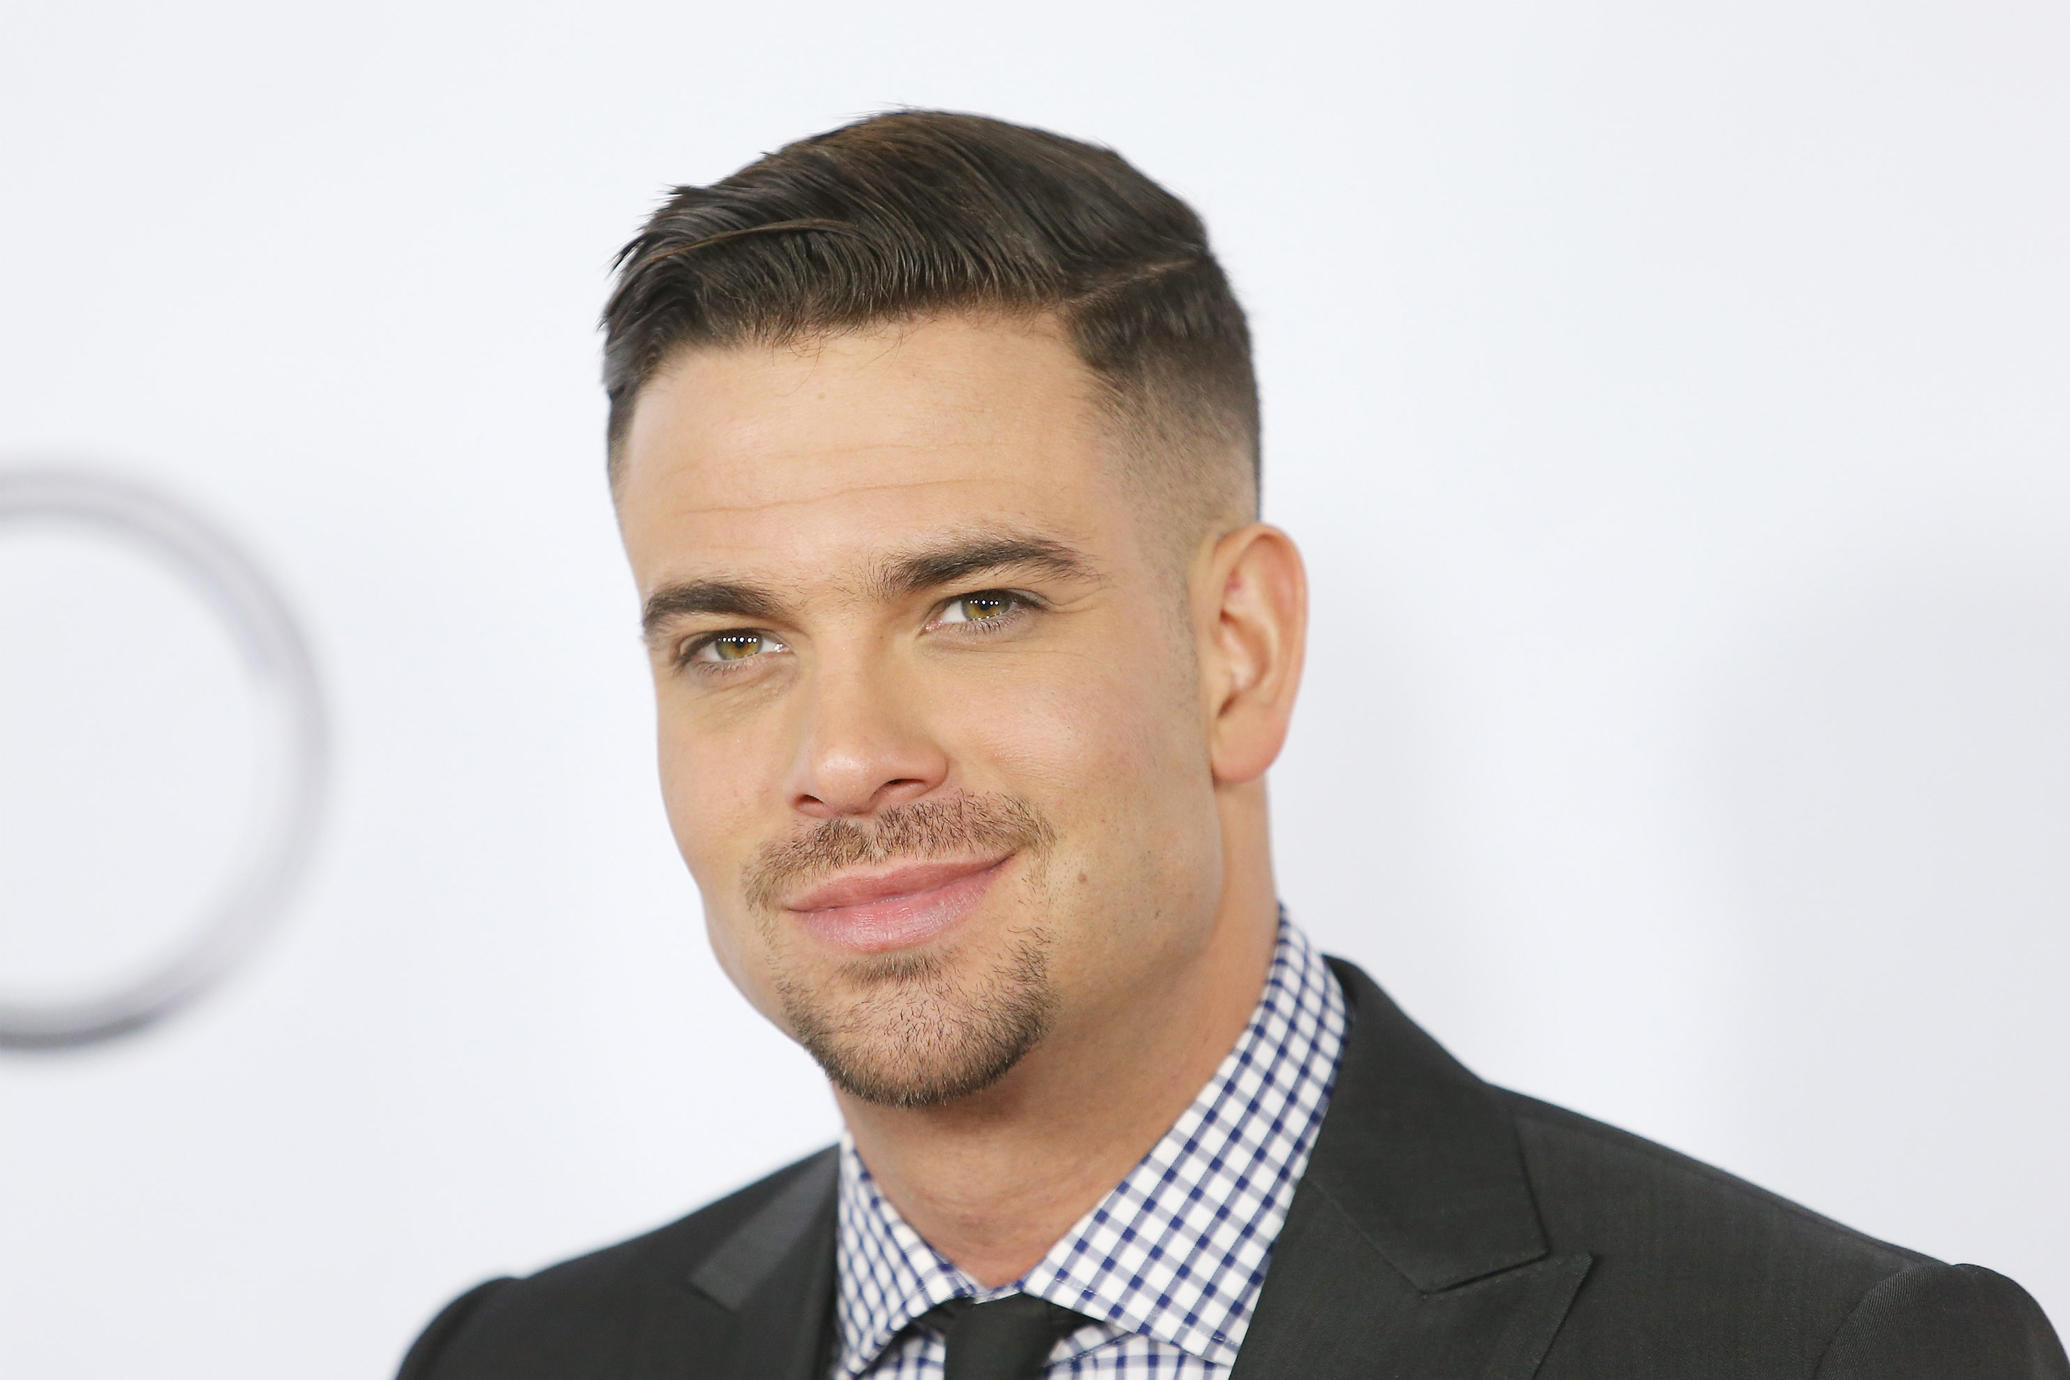 Glees Mark Salling Indicted On Child Pornography Charges